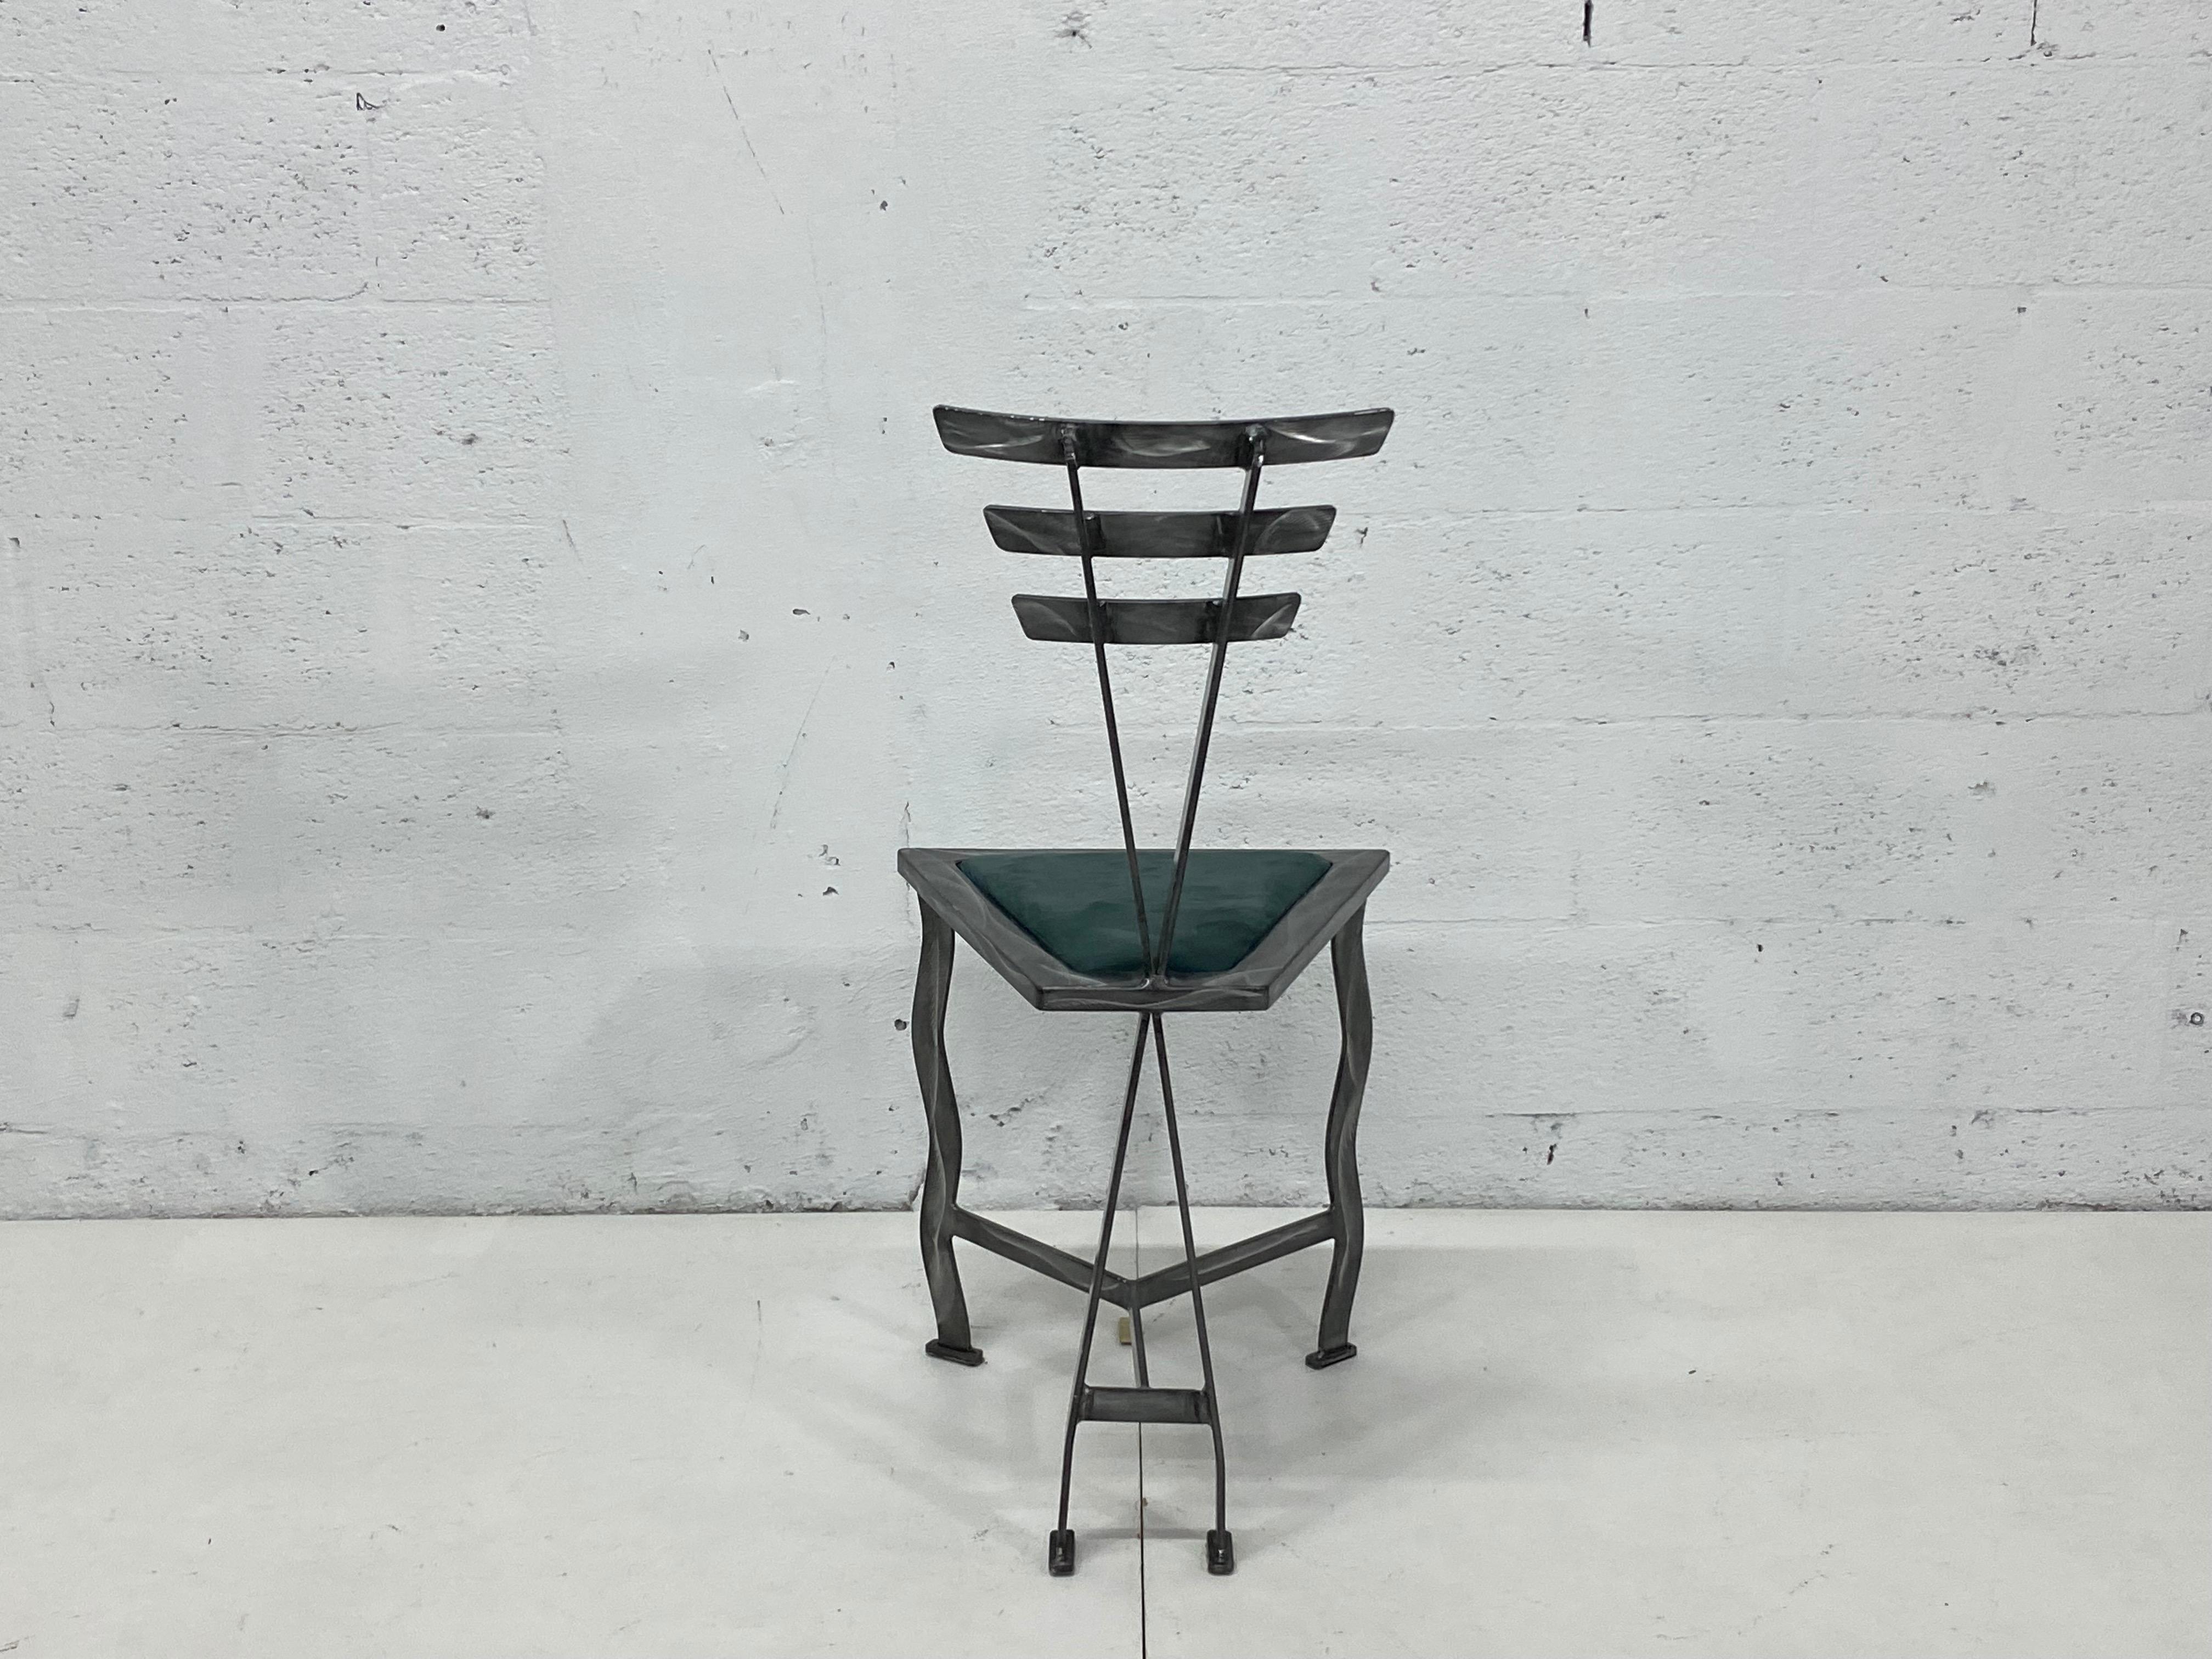 Unknown 90s Postmodern Contemporary Welded Steel Studio Side Chairs, a Pair